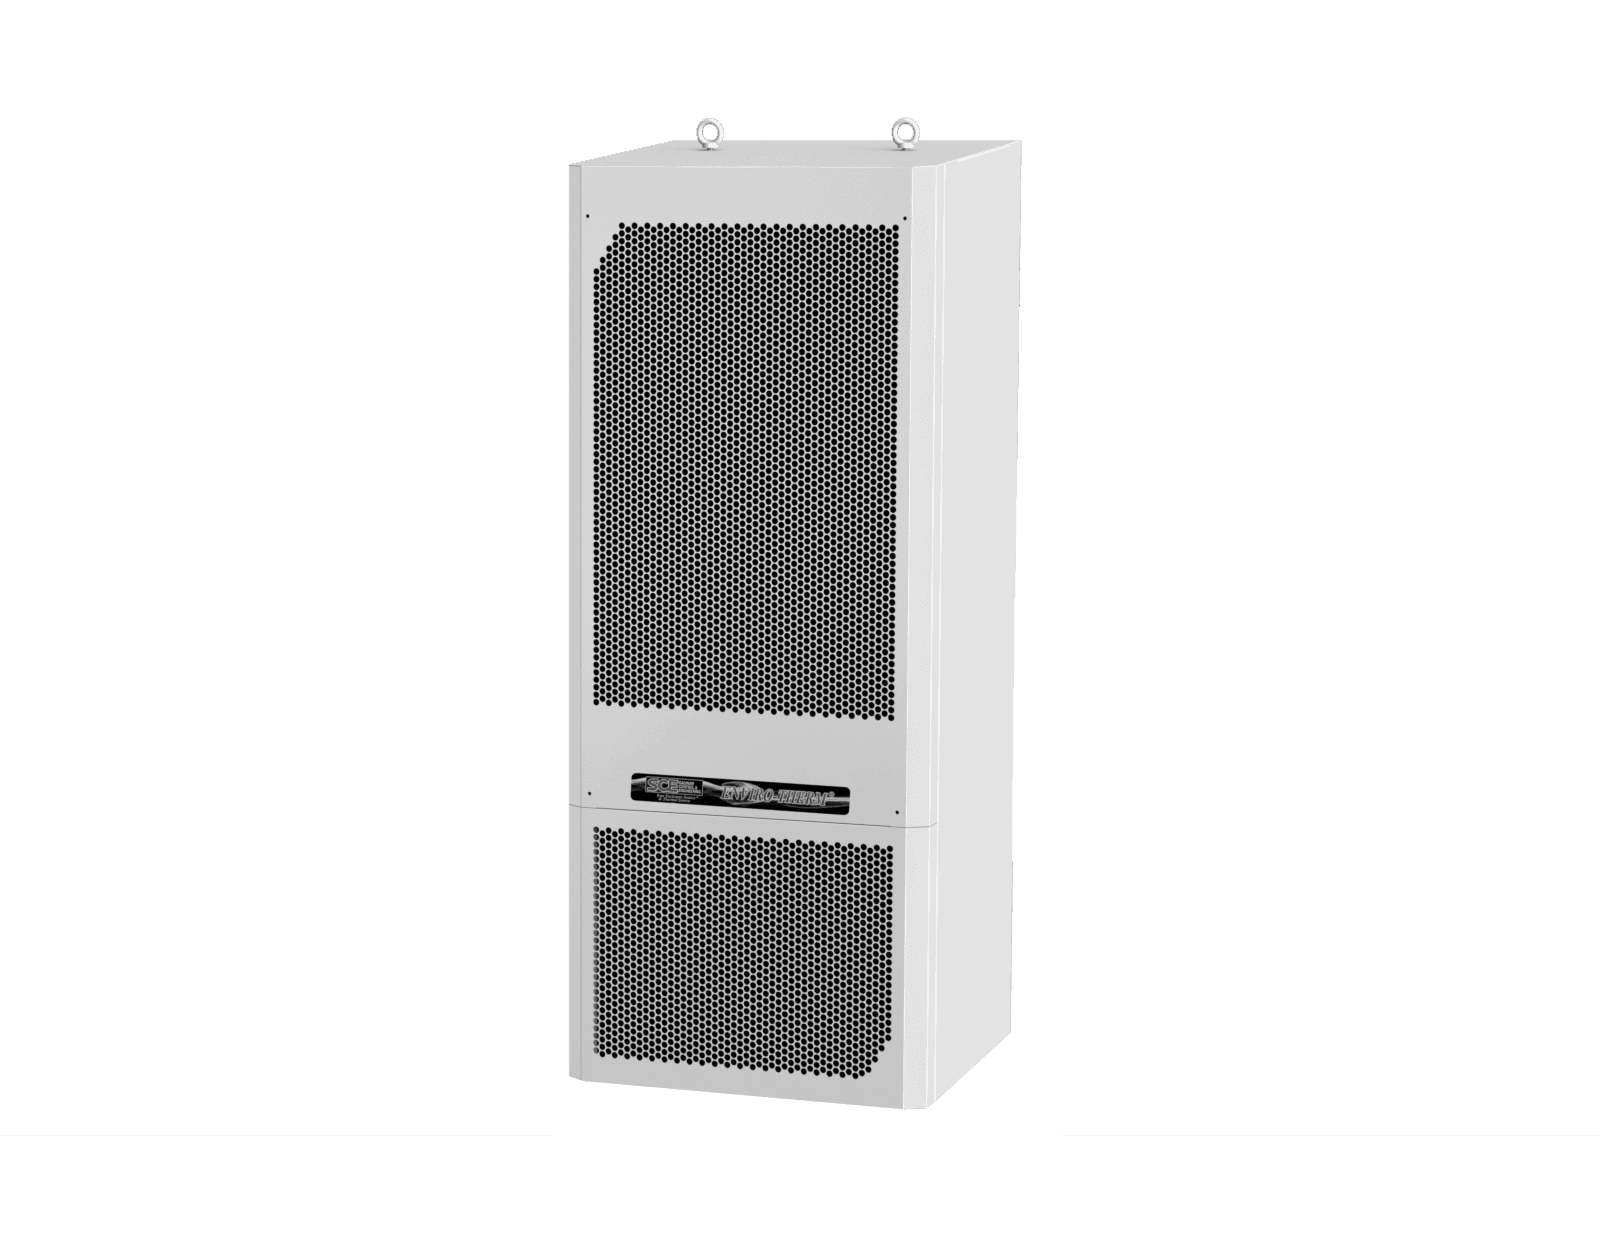 Saginaw Control SCE-AC21160B460V3SS Air Conditioner 21160 BTU 460V 3 Phase, Height:44.70", Width:18.00", Depth:15.40", SS units: #4 brushed finish 304 Stainless